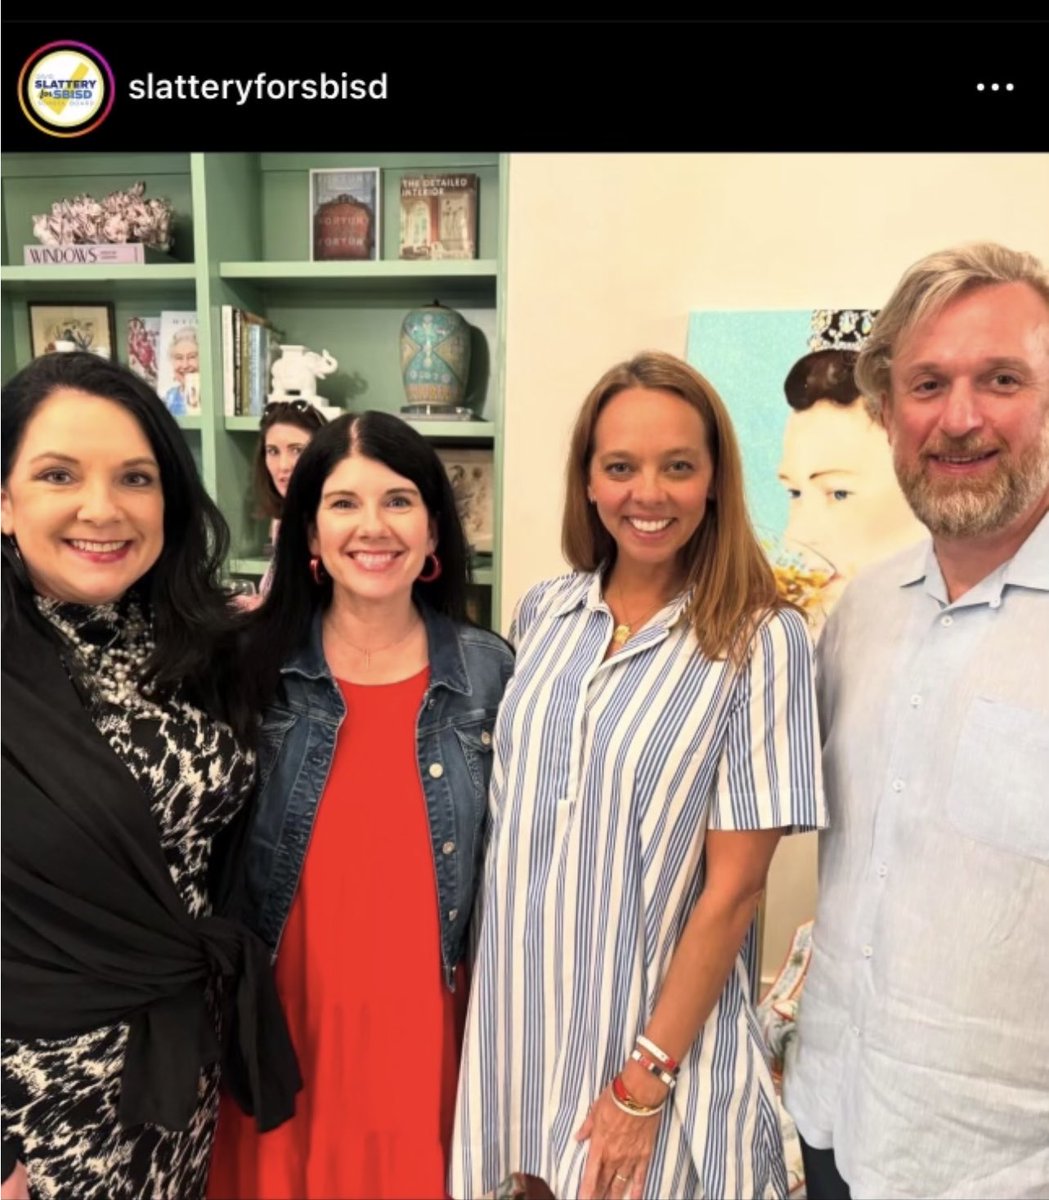 Early voting starts Monday  in @SBISD. 
This picture represents everything-and I mean everything-that is wrong in our district. “A sister, a SBISD trustee & lawyer, another lawyer, & a former mayor. Are these the people behind the @SaveSBISD despicable operation? #Vote4MattCone